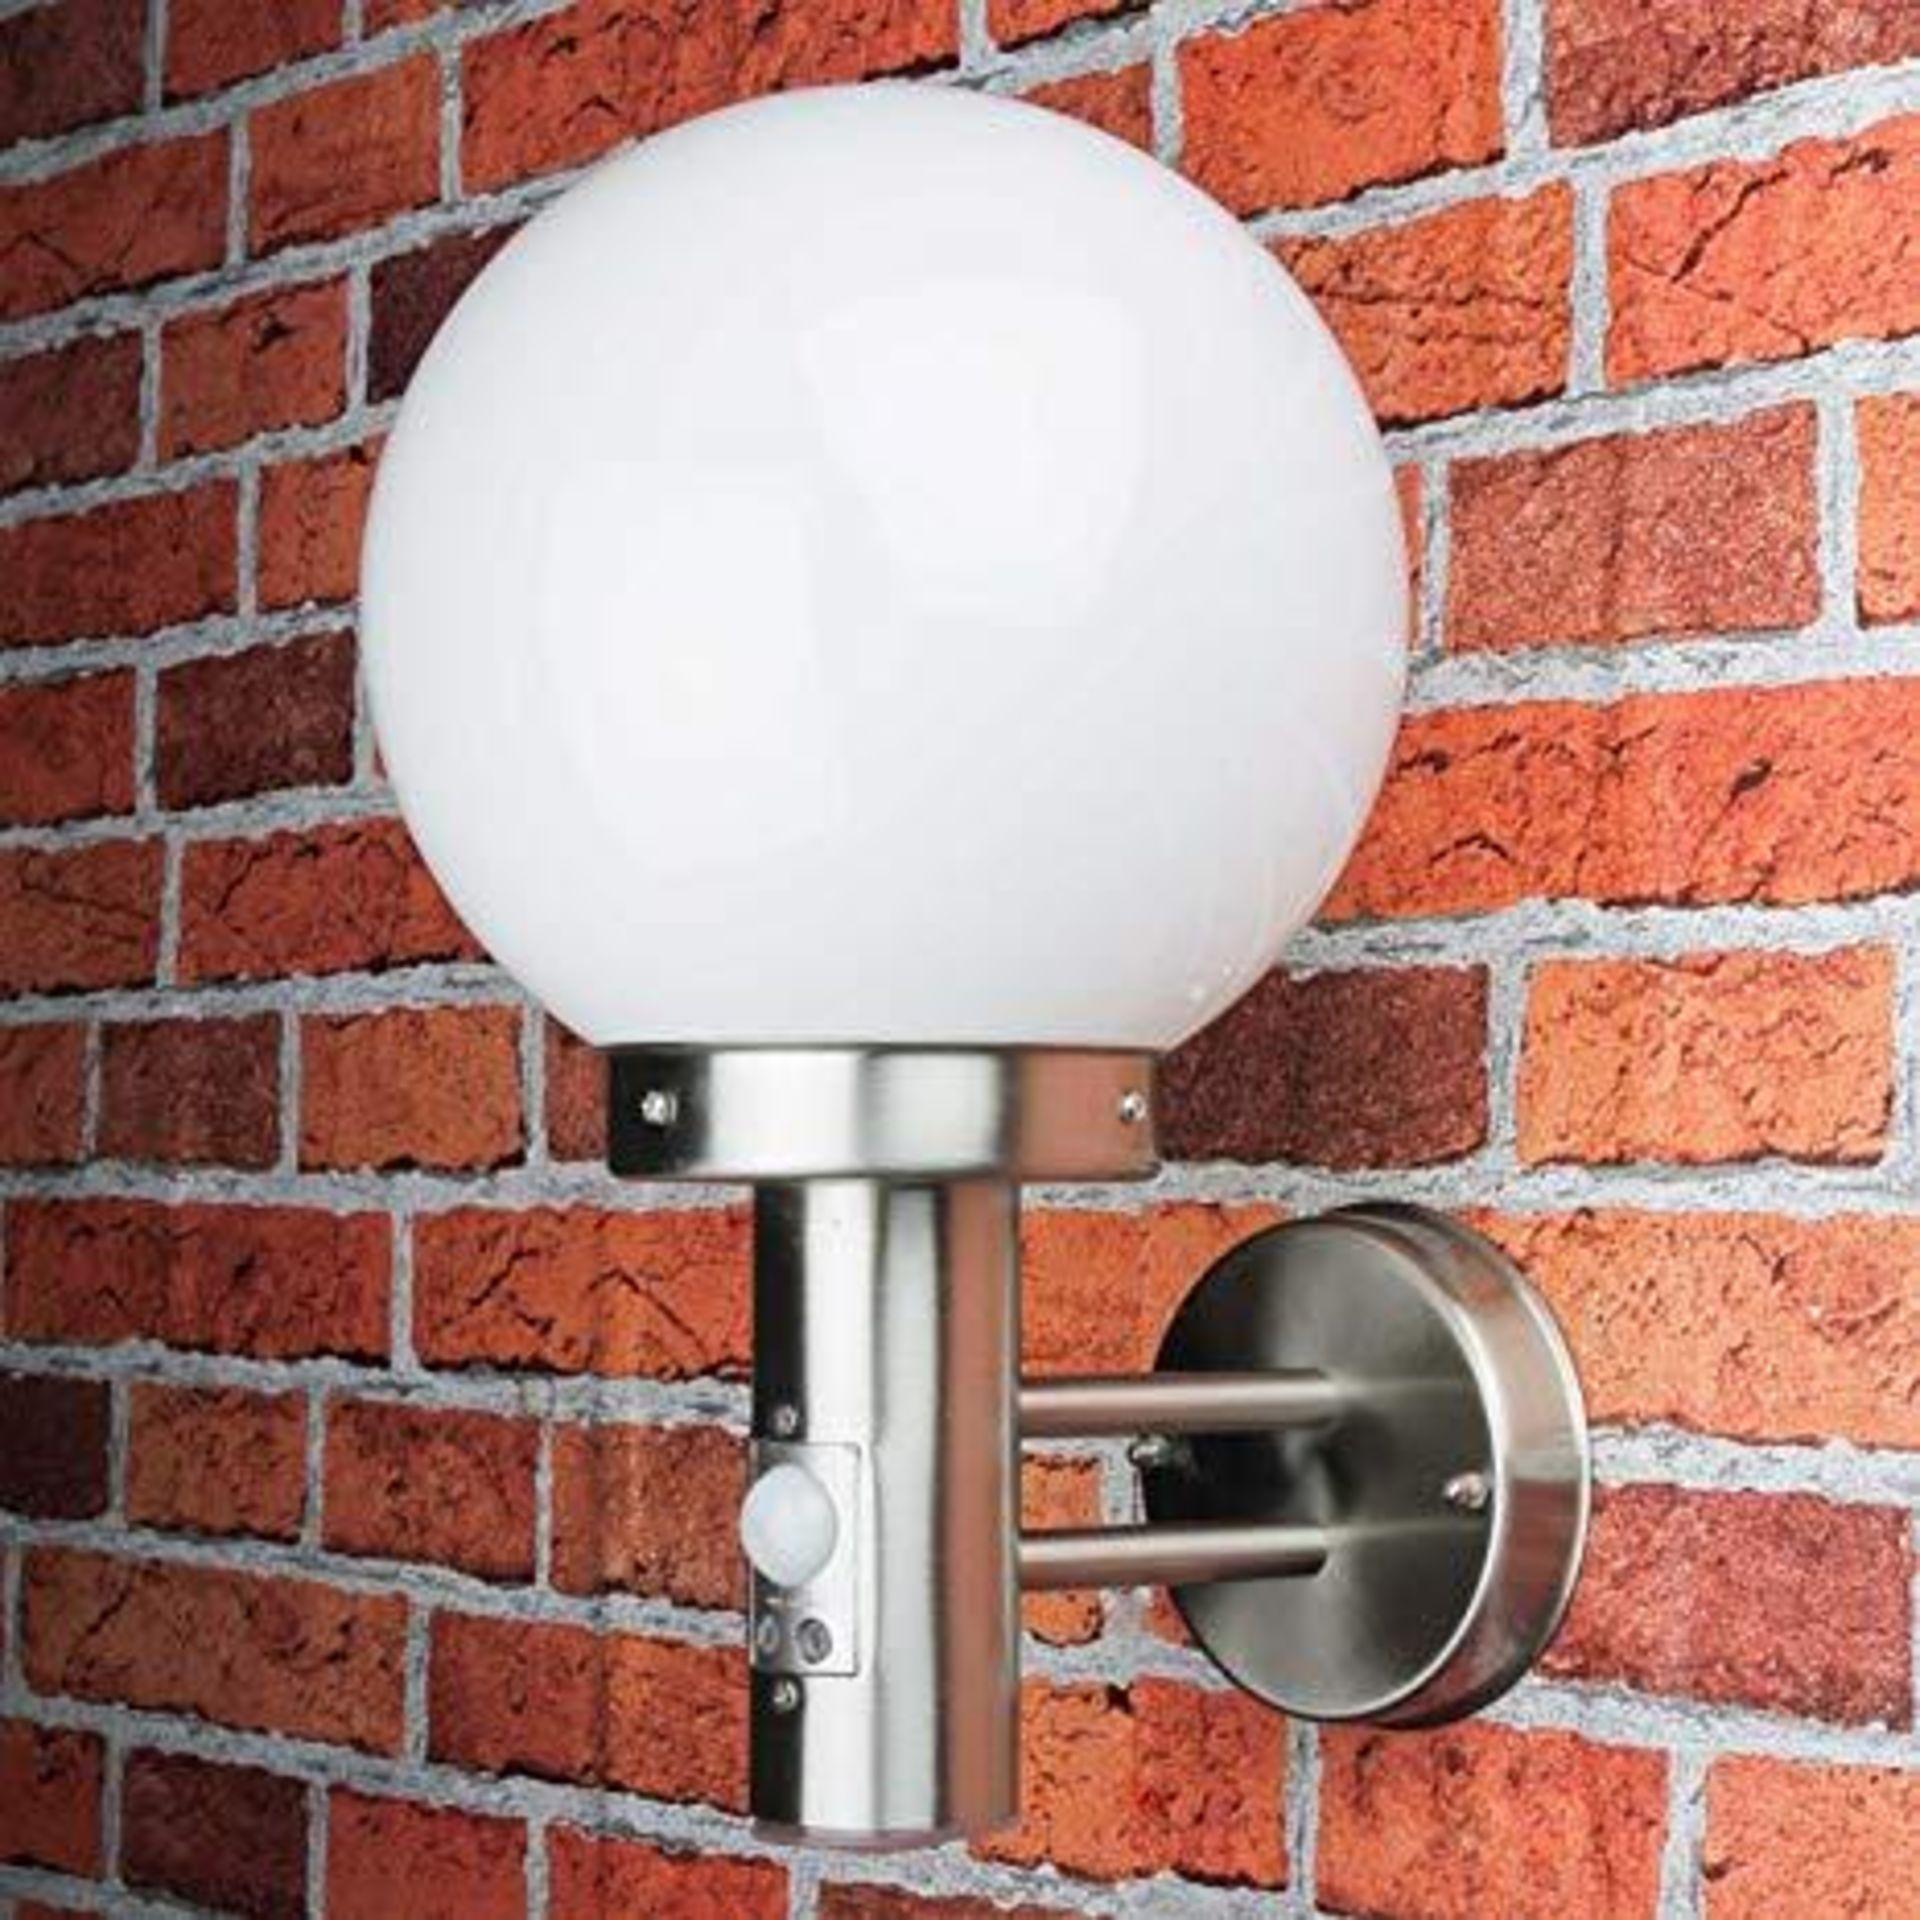 4 x Globe Outdoor Wall Light With PIR Motion Sensor - Stainless Steel With Polycarbonate Shade - IP4 - Image 2 of 6